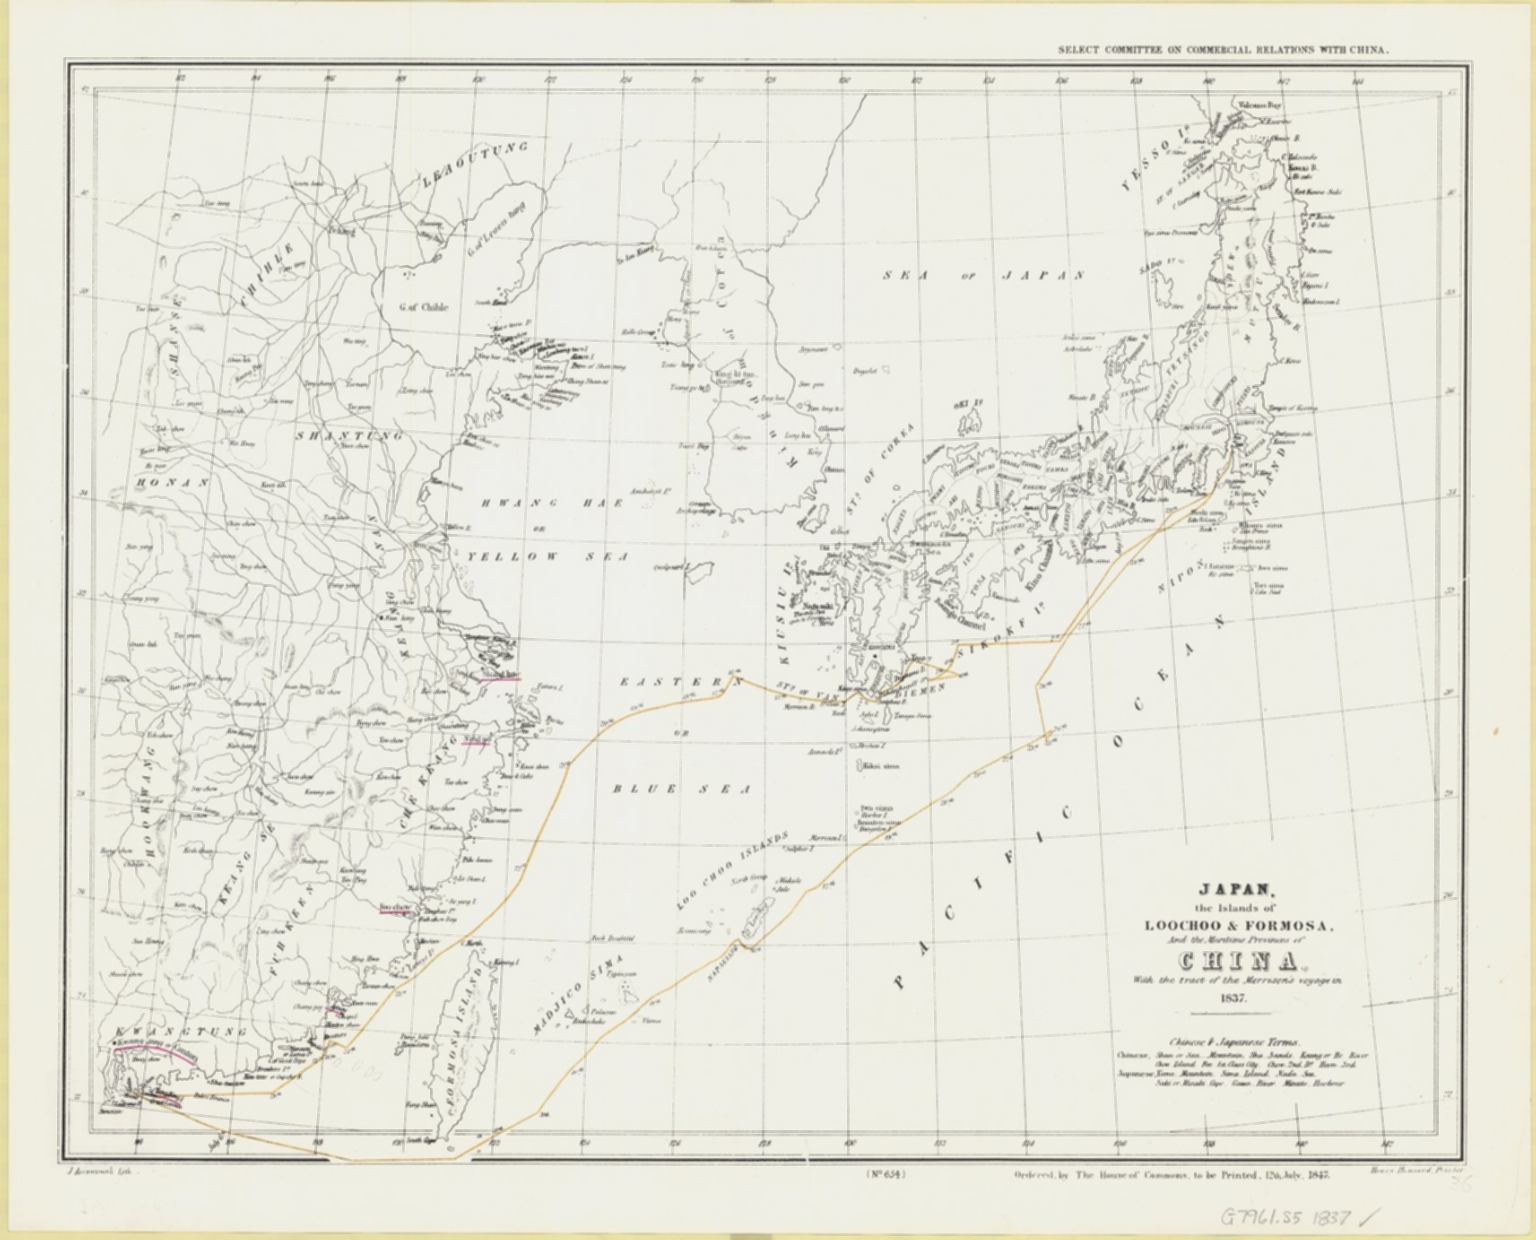 Japan, the islands of Loochoo & Formosa, and the maritime provinces of China with the tract of the Morrison's voyage in 1837